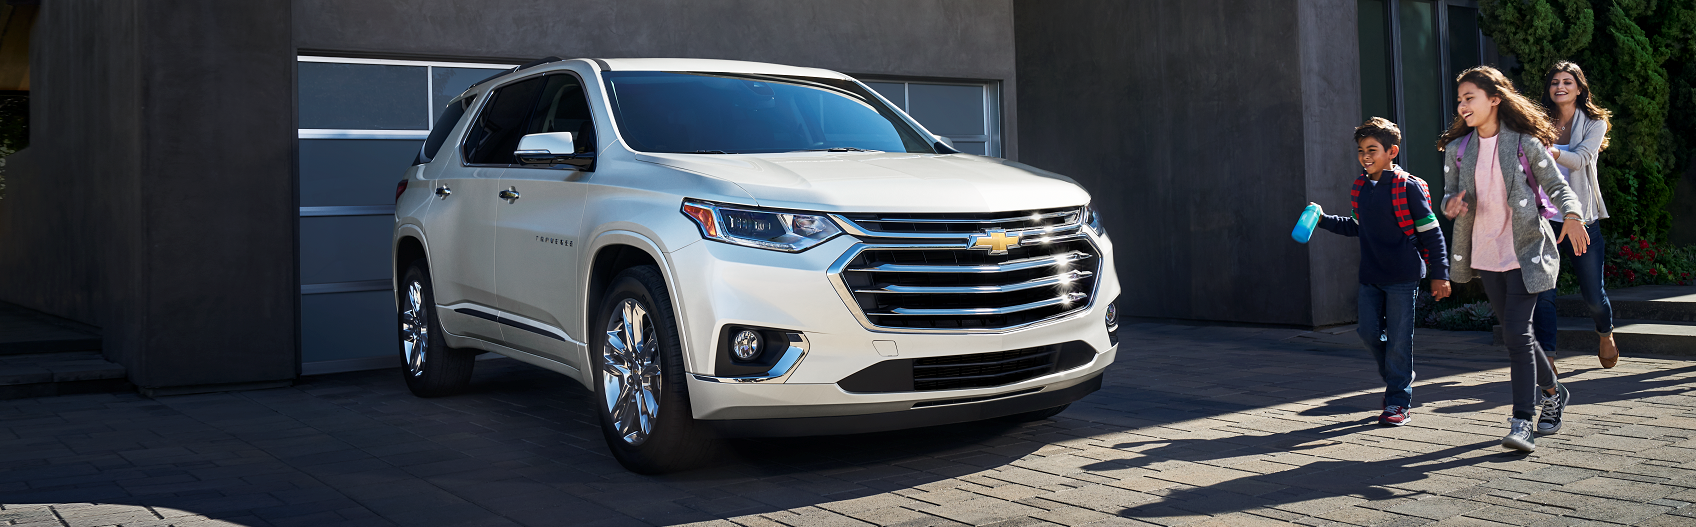 Chevy Traverse vs Buick Enclave New Hudson